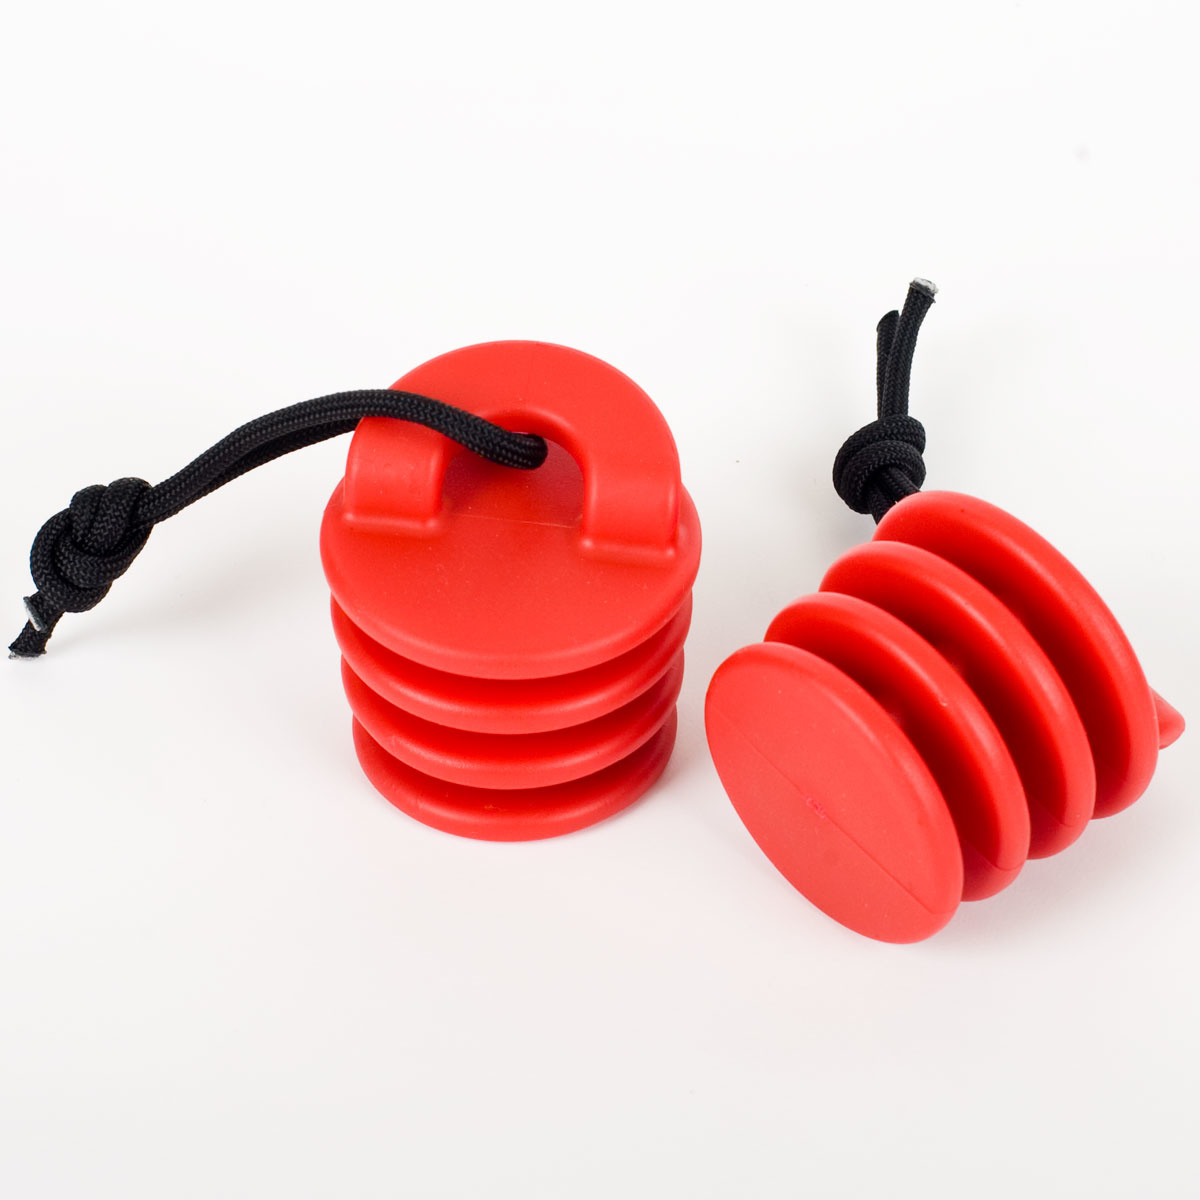 Ocean Kayak Scupper Stoppers - Large (RED) - Single